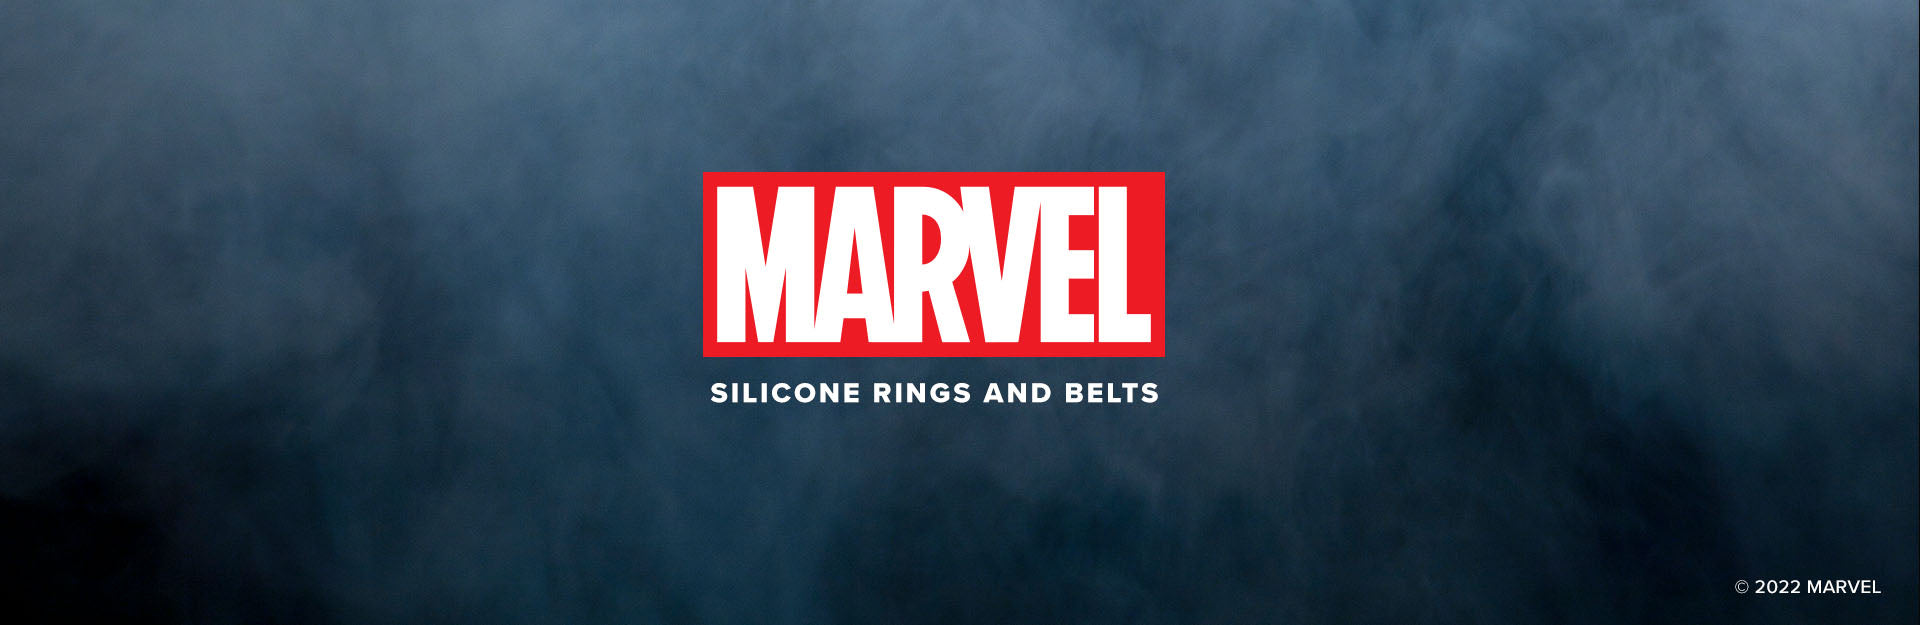 marvel silicone rings and belts